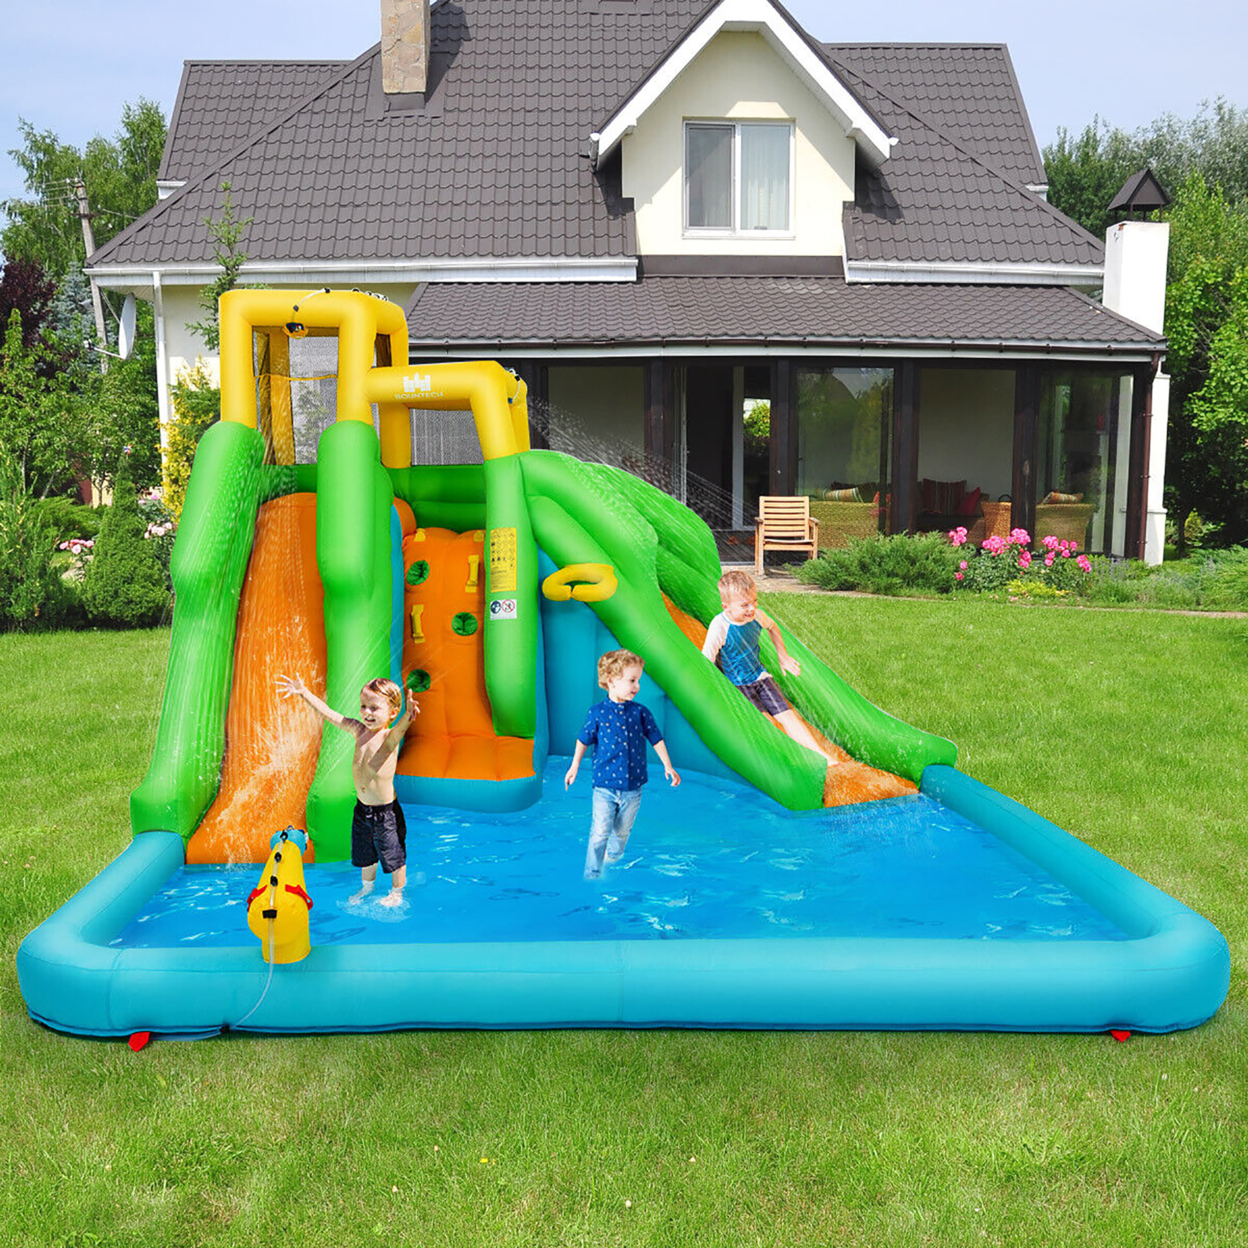 Inflatable Water Park Bounce House Two-Slide Bouncer W/ Climbing Wall & 550W Blower